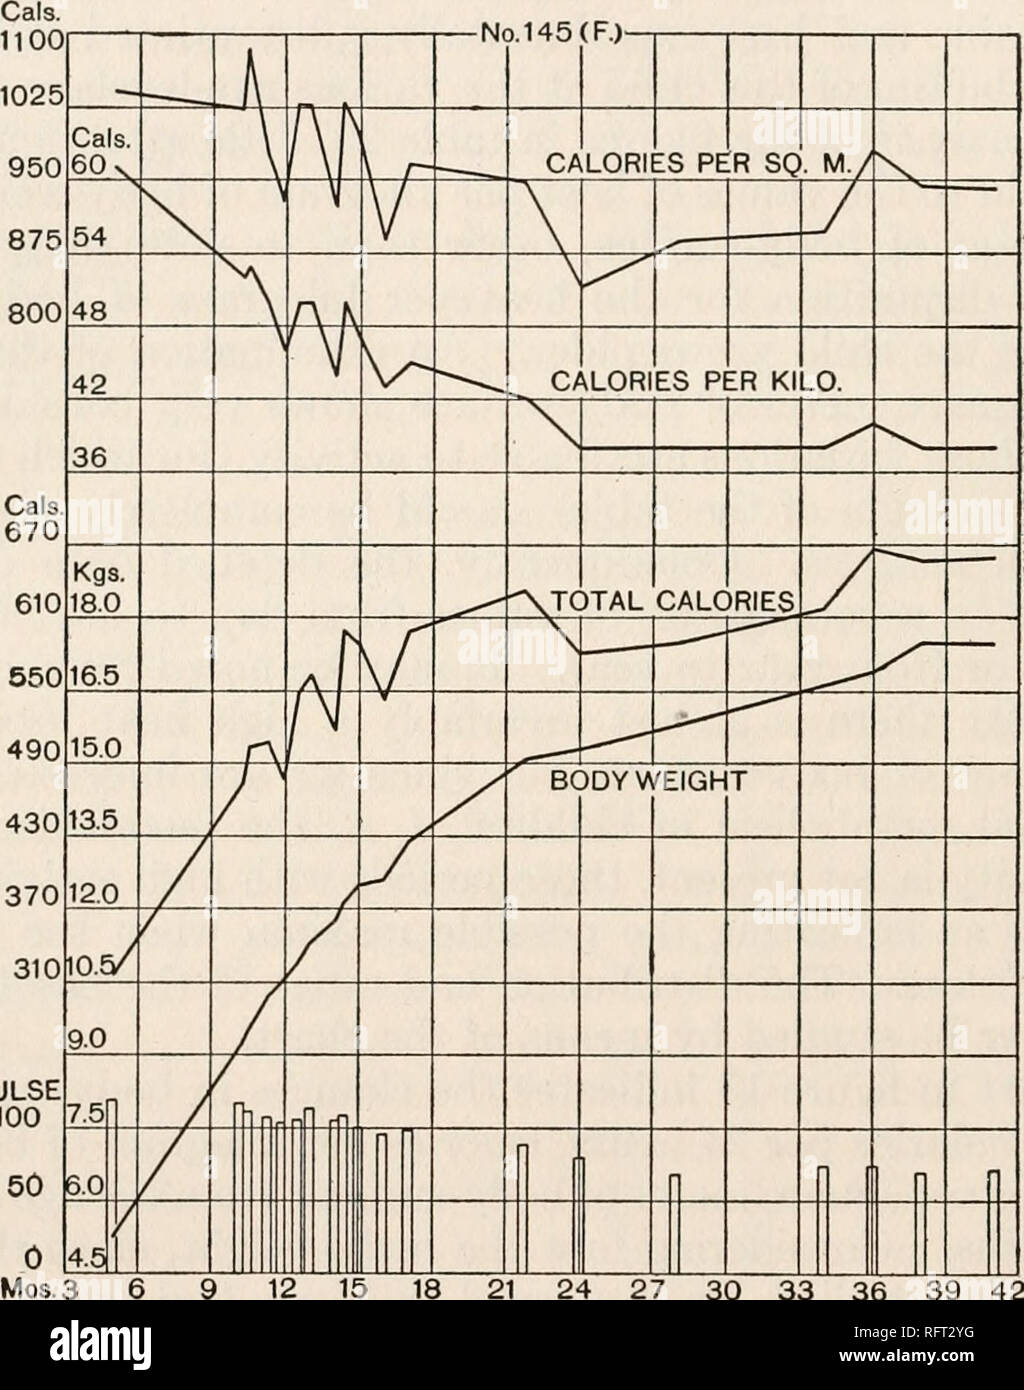 . Carnegie Institution of Washington publication. 114 METABOLISM AND GROWTH FROM BIRTH TO PUBERTY. per kilogram of body-weight, and to a unit of surface, i. e., the calories per square meter of body-surface. These have both been charted, the former showing a distinct tendency for a downward trend from 61 calories at 5 months to an approximate level at 38 calories between the twenty-fourth and forty-first months. It thus appears that per kilogram of body-weight the heat production of the infant is consid- erably greater than that of a child from 2 to 3 years of age.. 370 310 PULSE 100 Mos.3 6 1 Stock Photo